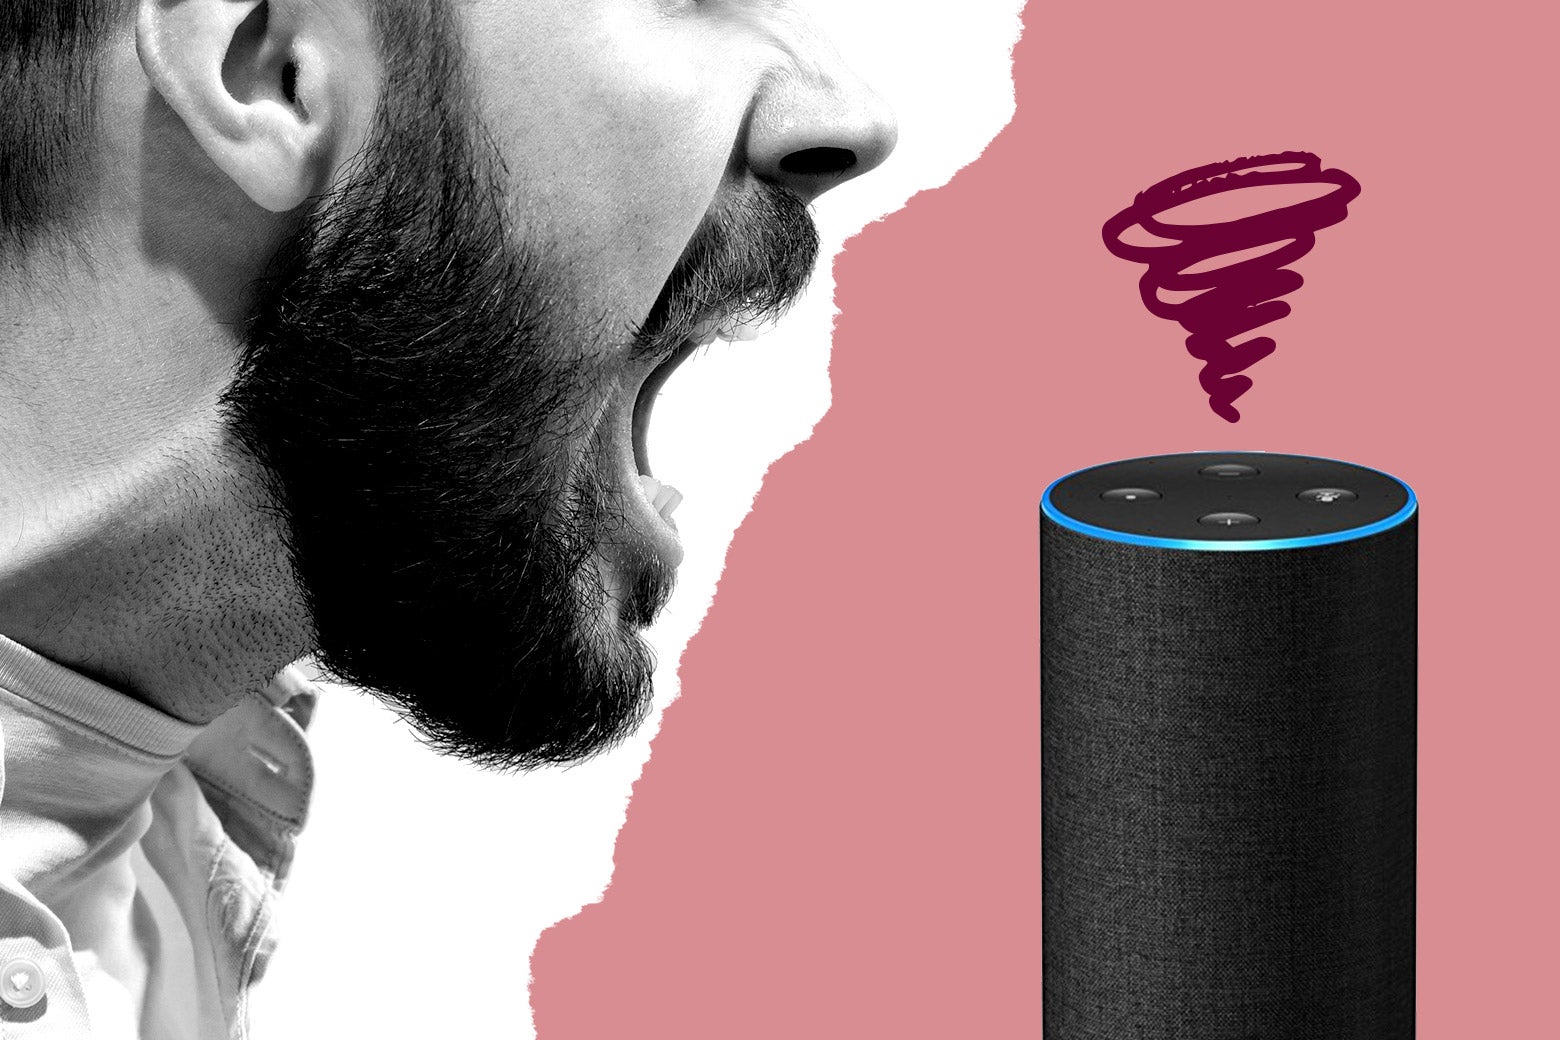 Photo illustration: a man speaking harshly to an Amazon Echo.